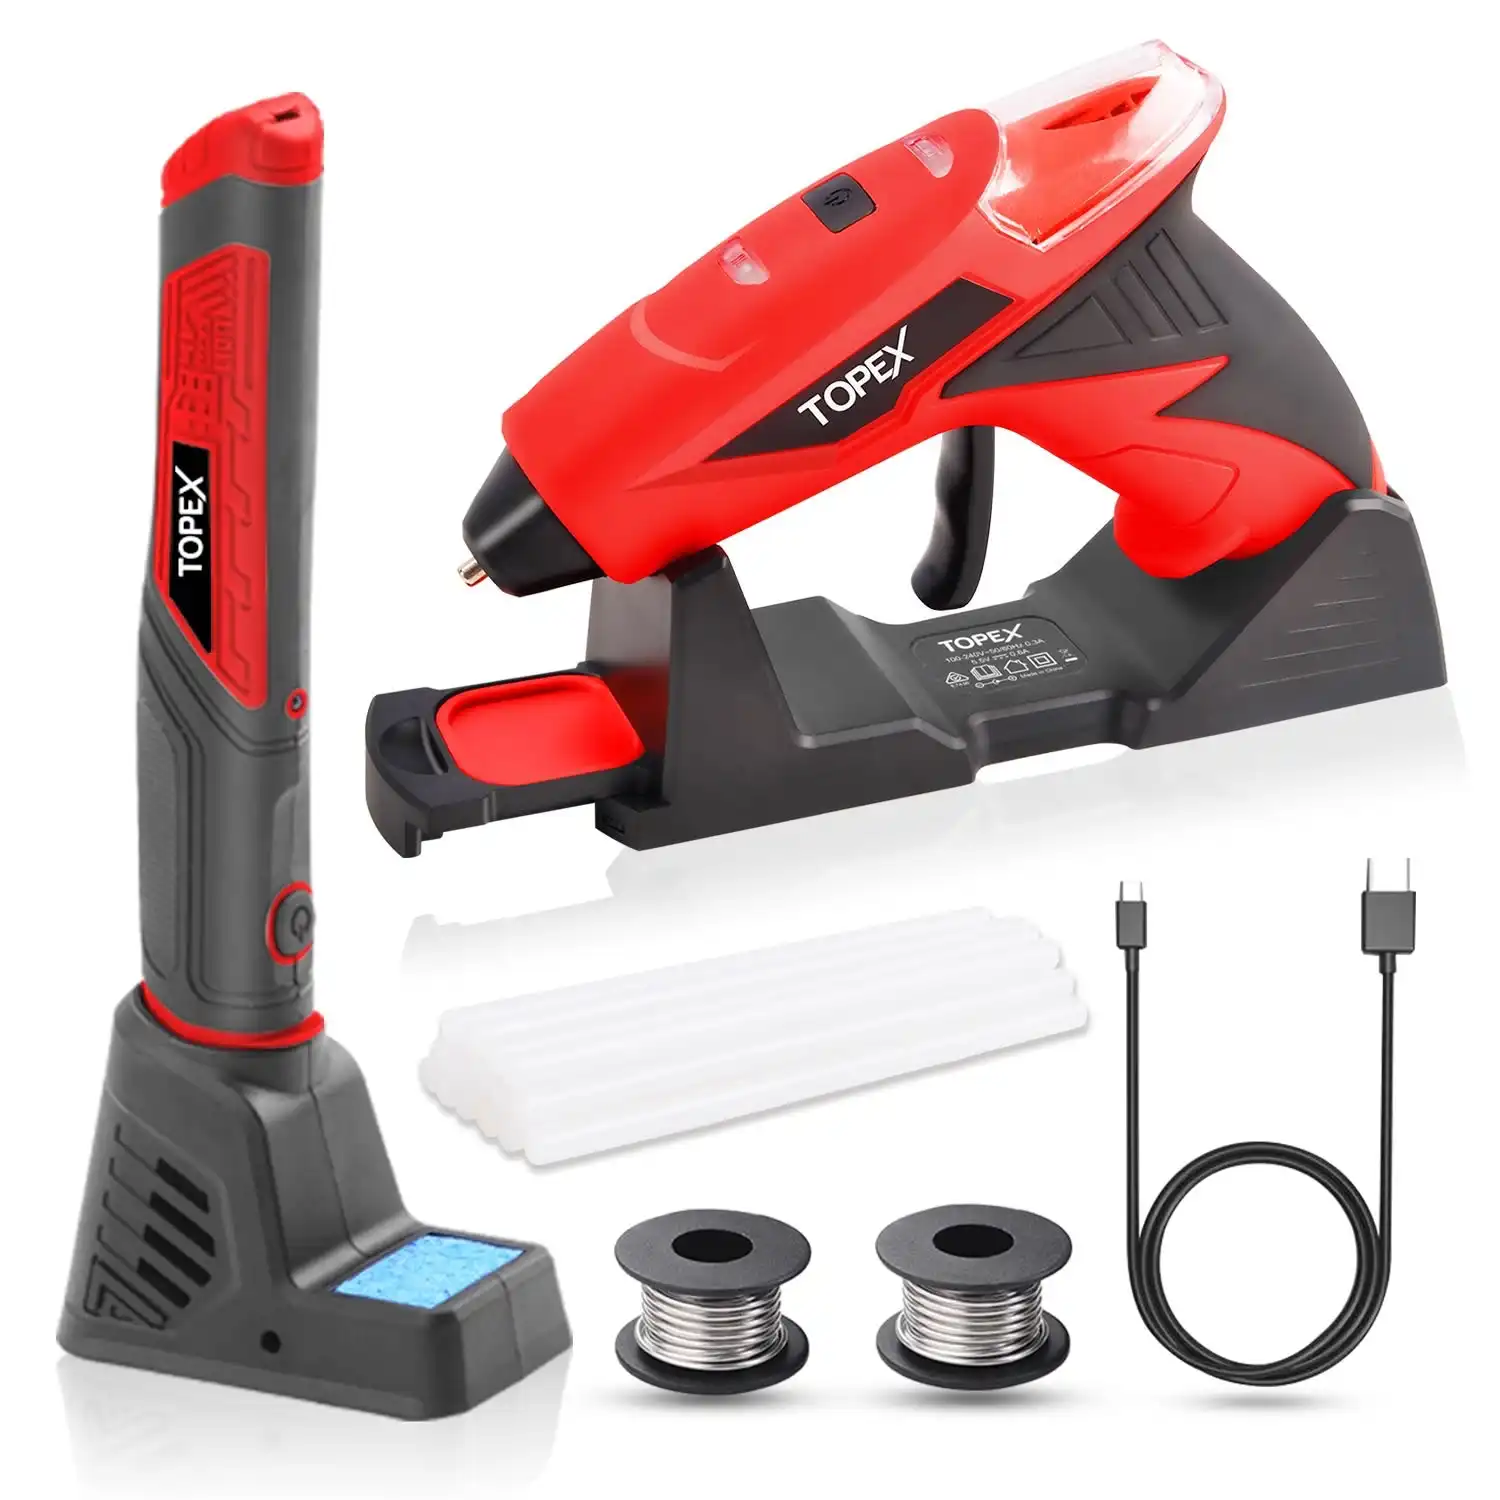 Topex 4V Max Cordless Glue Gun Soldering Iron Twin Kit with Adaptor Accessories